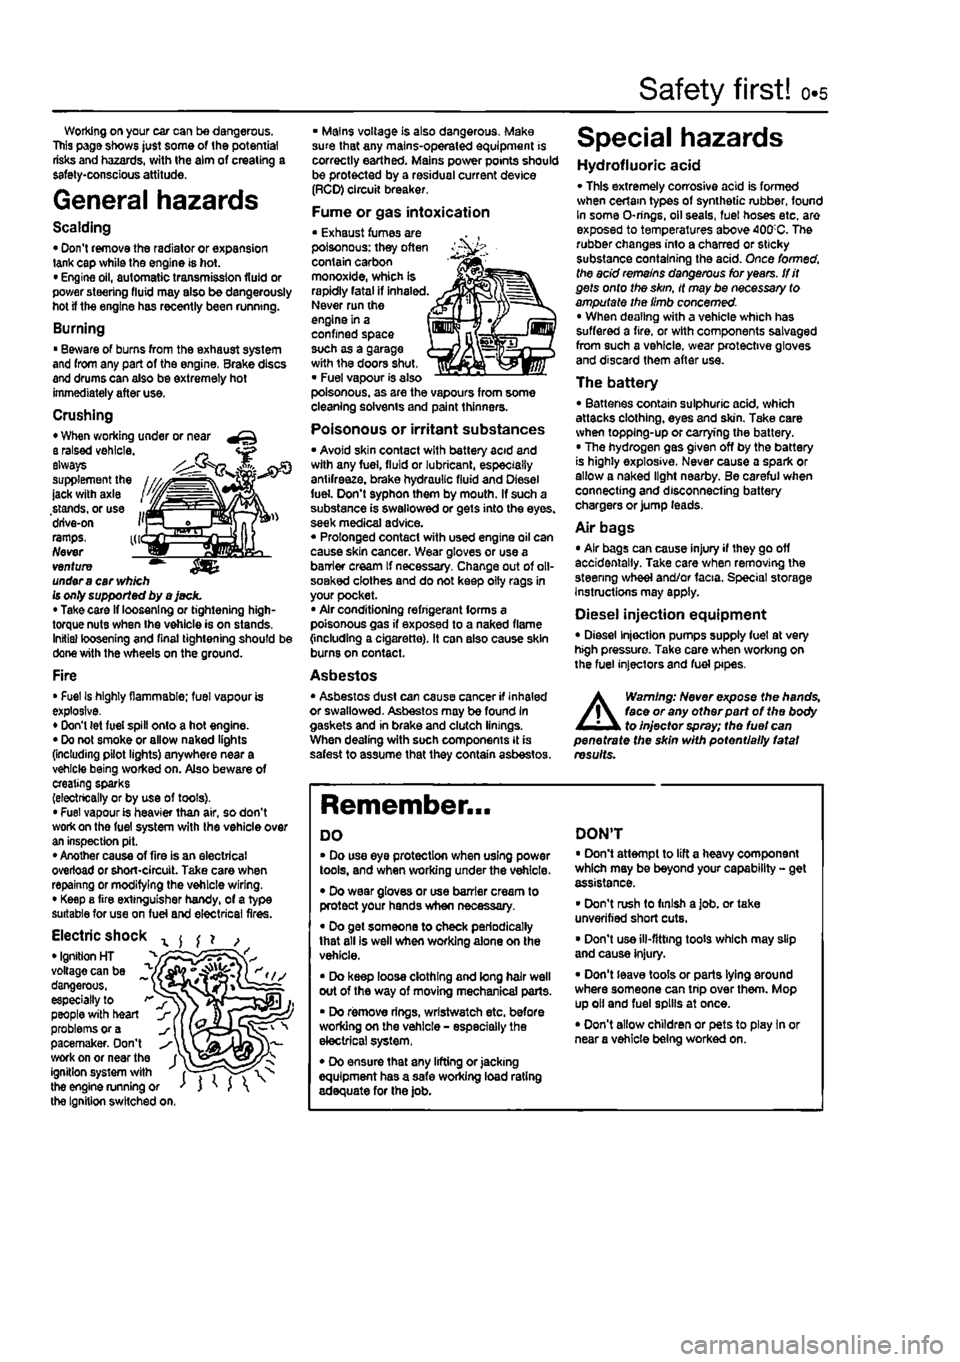 FIAT PUNTO 1999 176 / 1.G Workshop Manual 
Safety first! 0.5 
Working on your ear can be dangerous. This page shows just some of the potential risks and hazards, with the aim of creating a safety-conscious attitude. 
General hazards 
Scalding